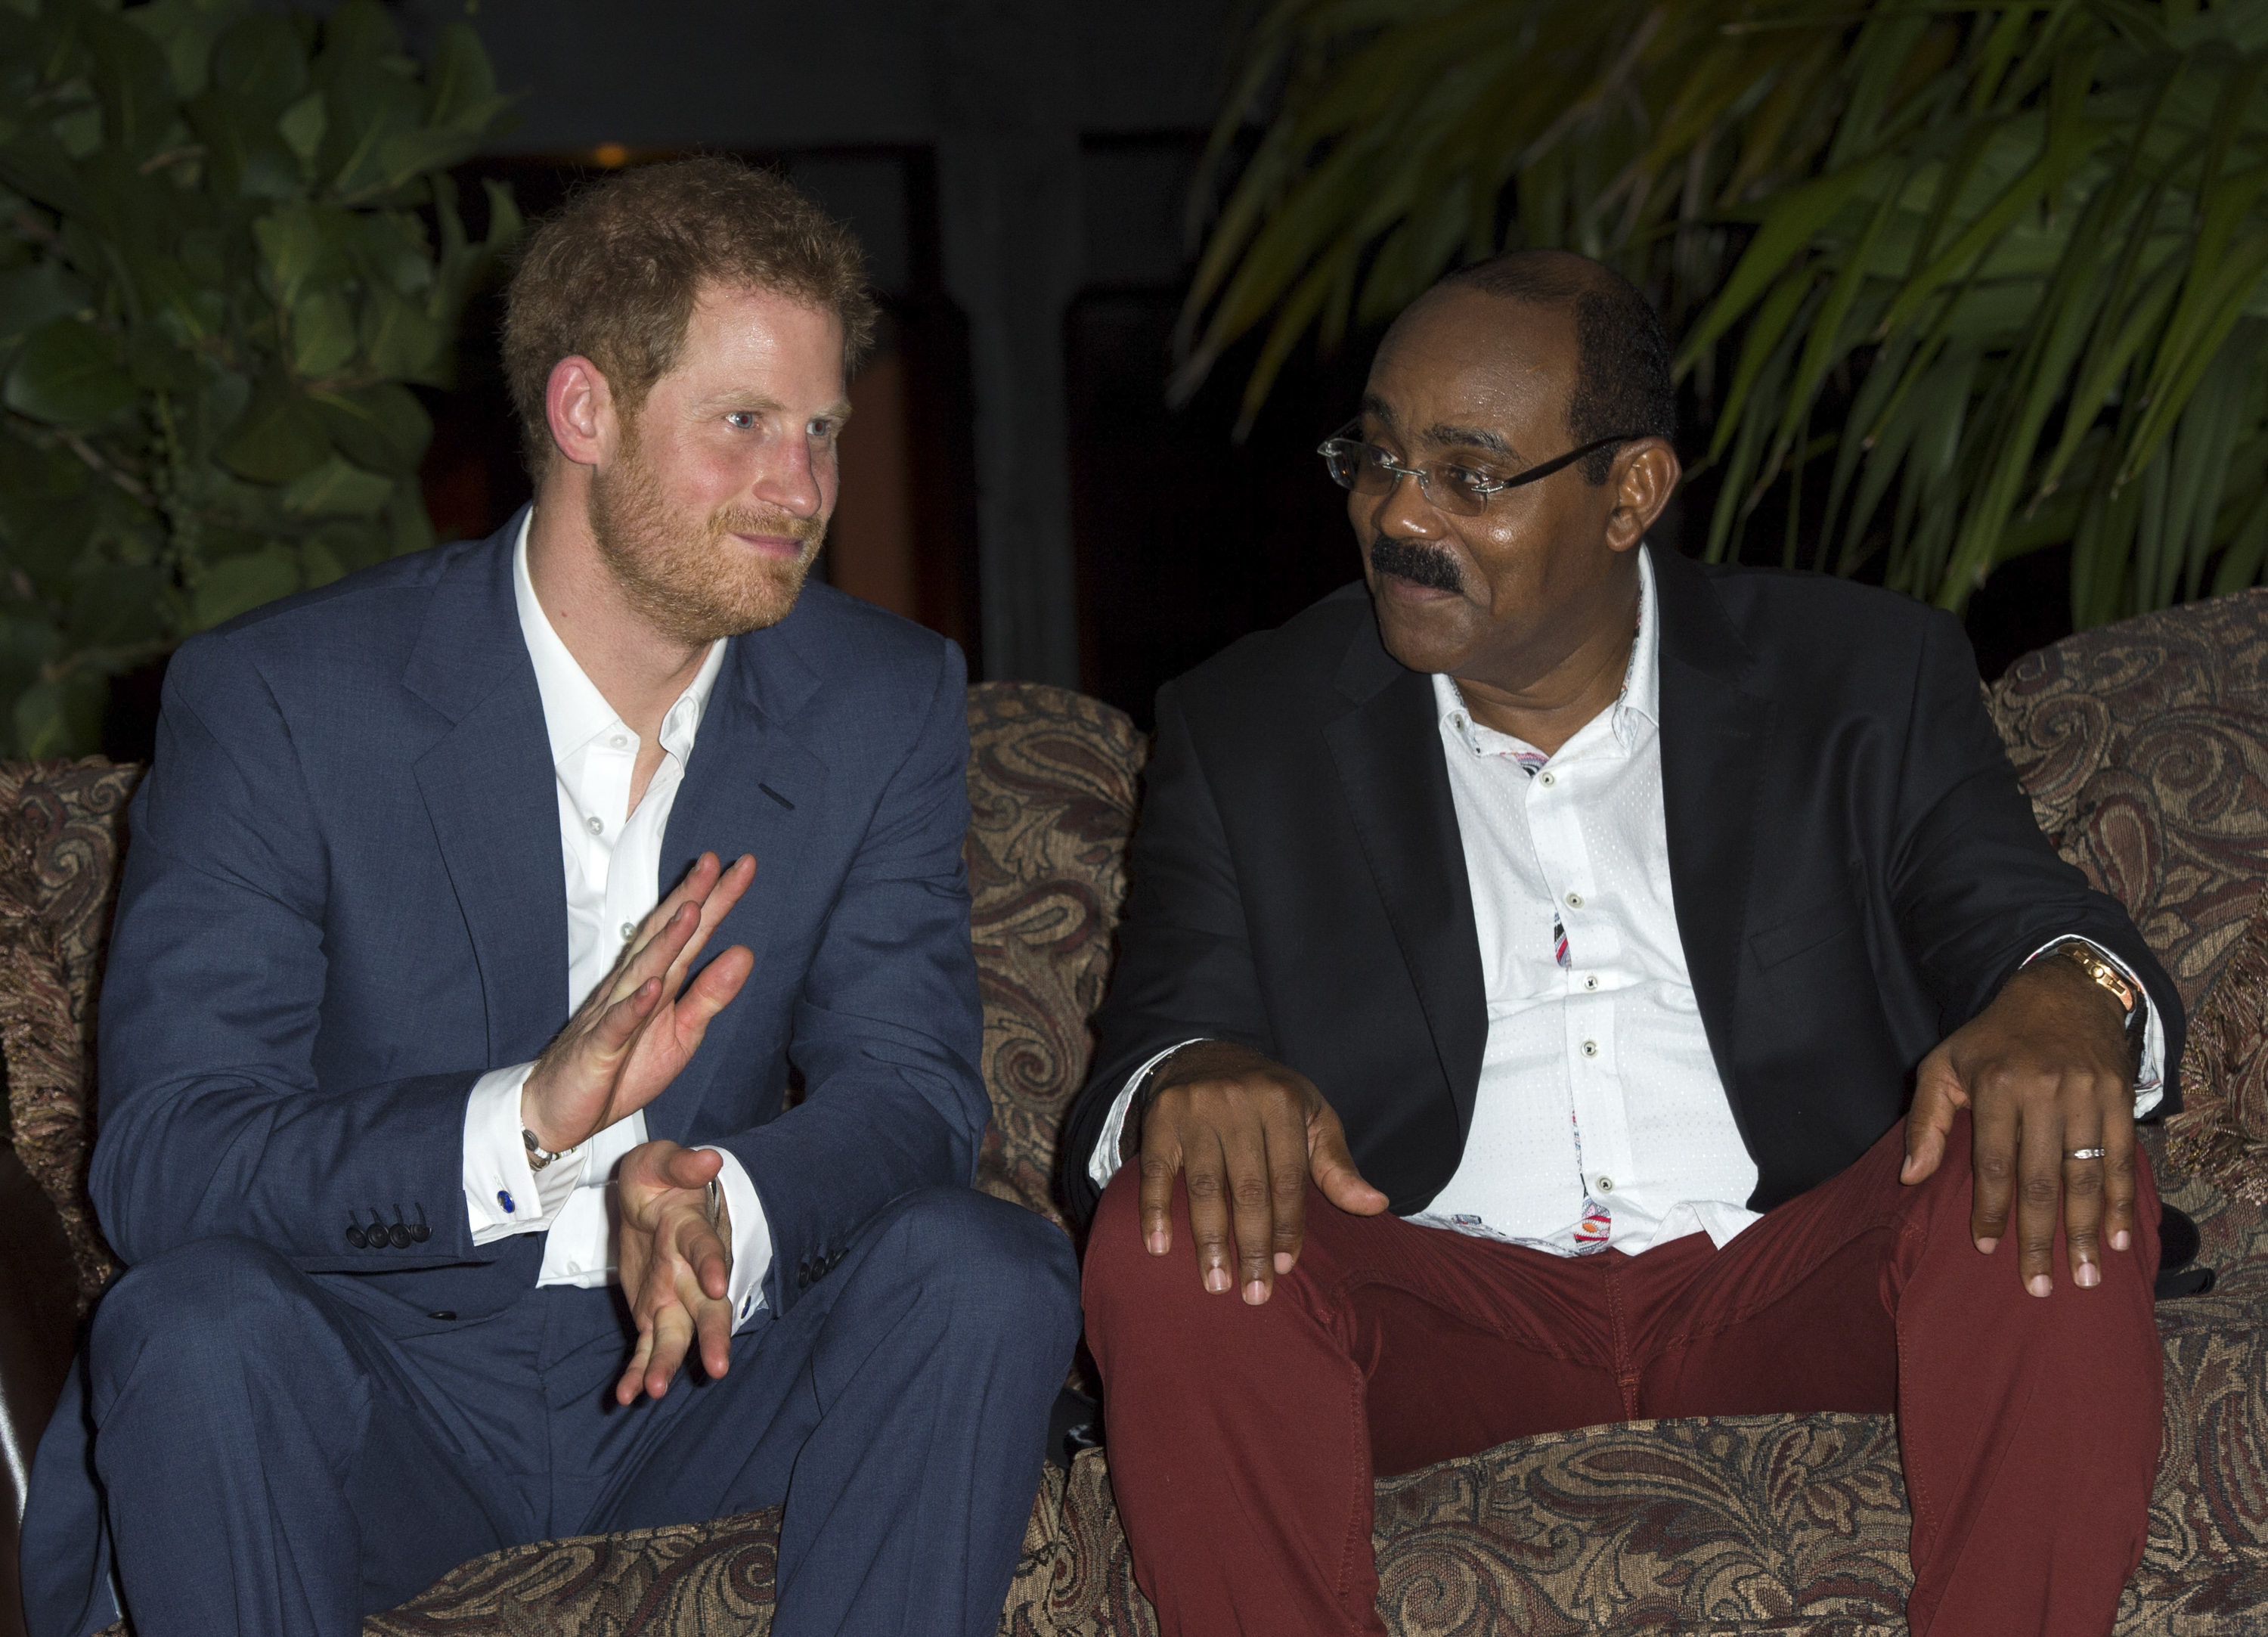 Prime Minister of Antigua and Barbuda Gaston Browne alongside Prince Harry during the British royal's official visit to Antigua on Nov. 21, 2016 (Pool/Samir Hussein—WireImage)